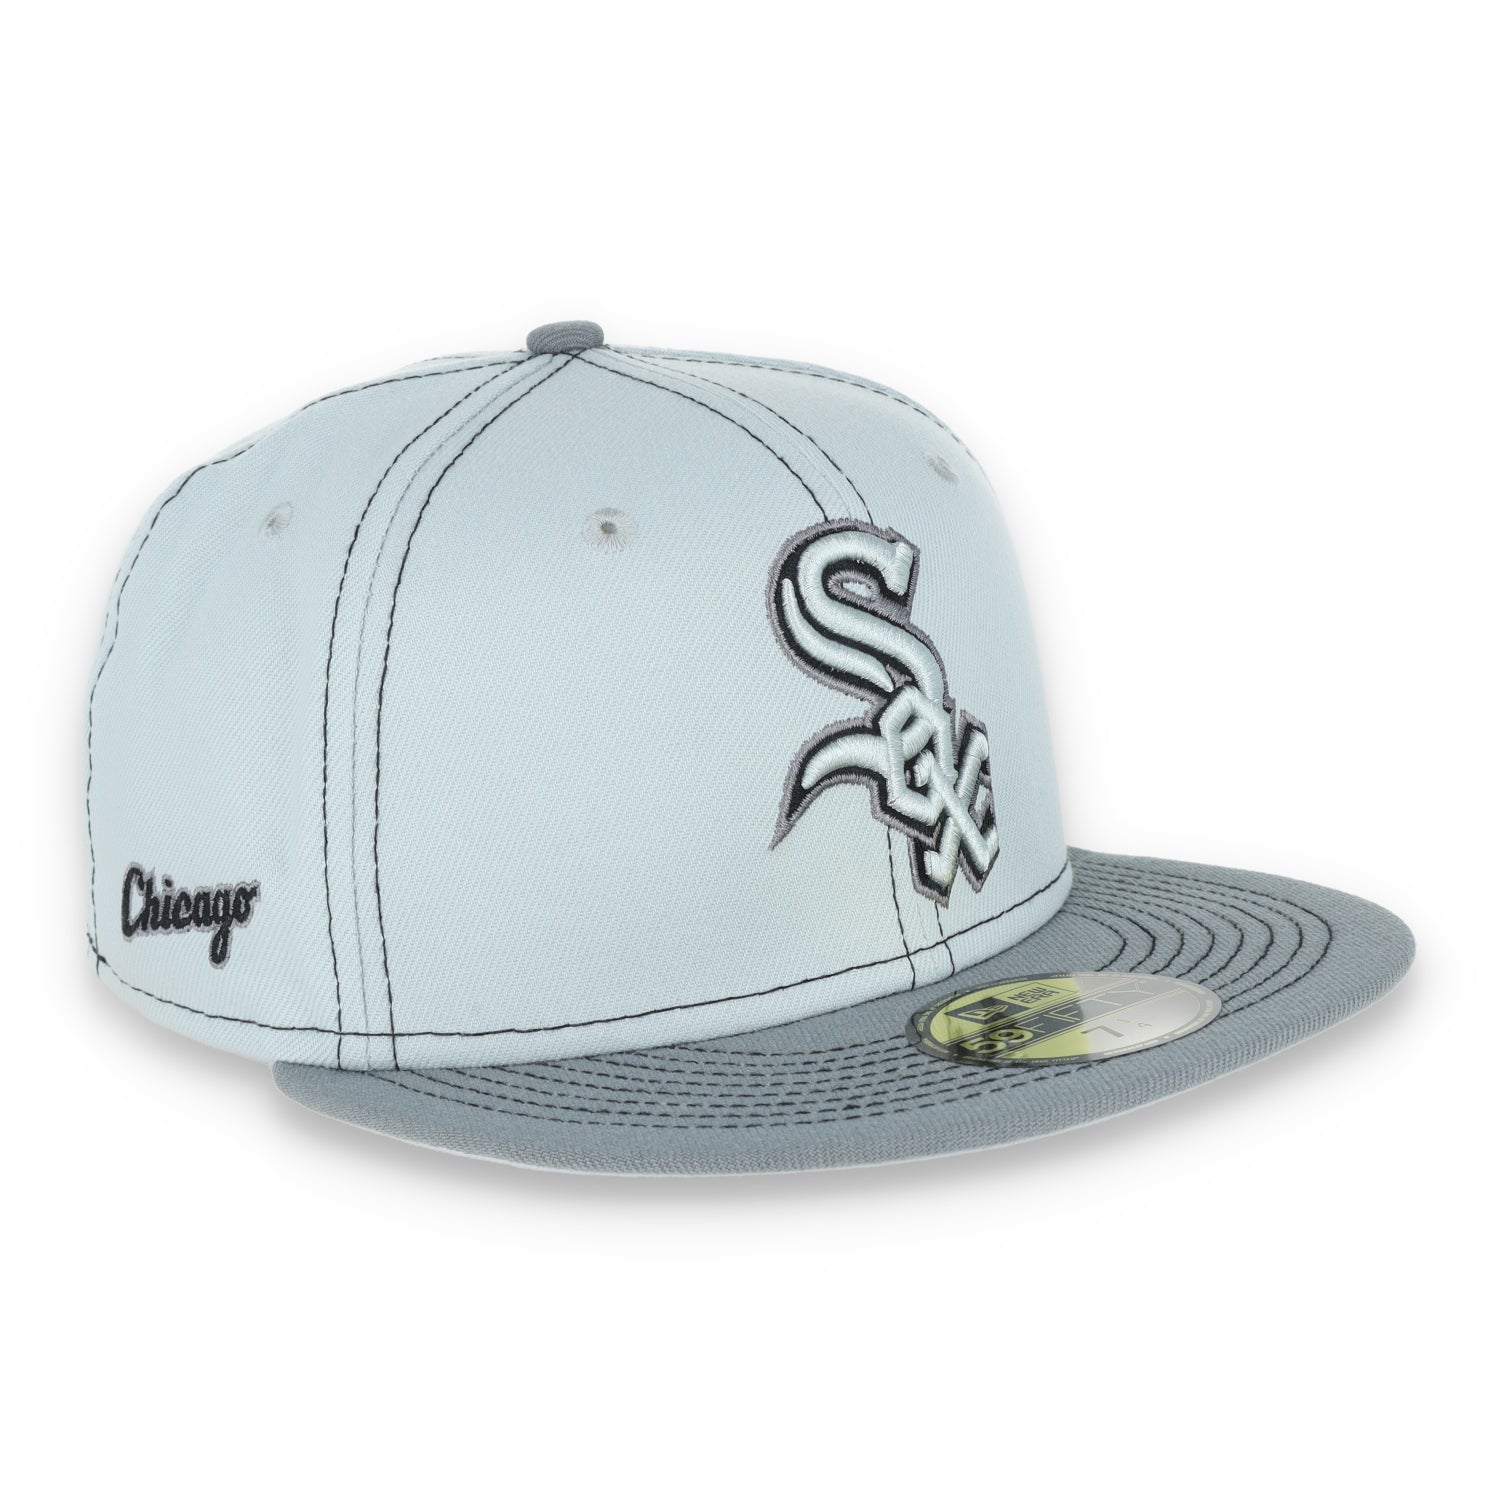 New Era Chicago White Sox Gray Pop 59FIFTY Fitted Hat- Gray